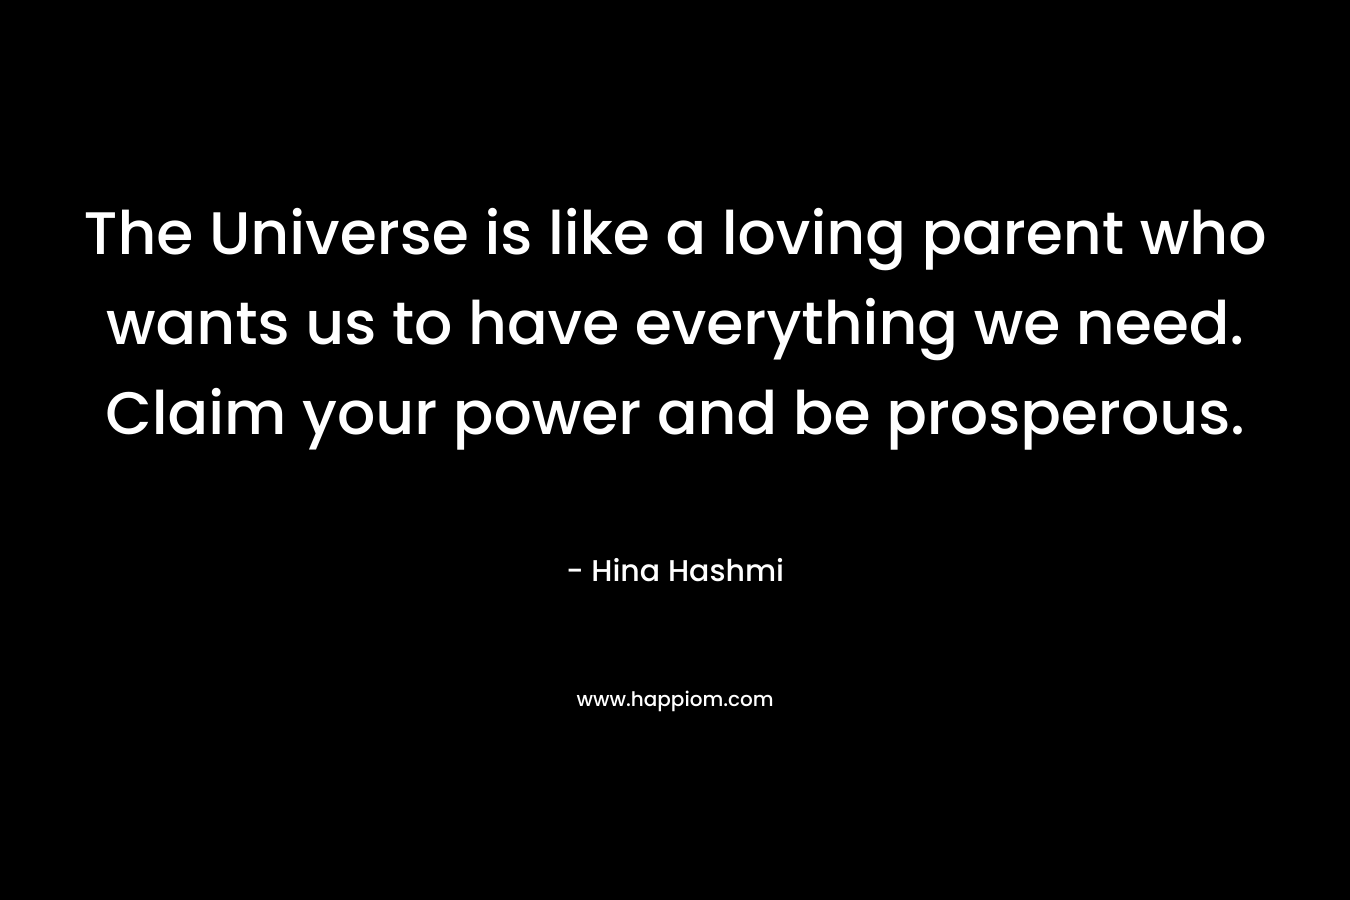 The Universe is like a loving parent who wants us to have everything we need. Claim your power and be prosperous. – Hina Hashmi